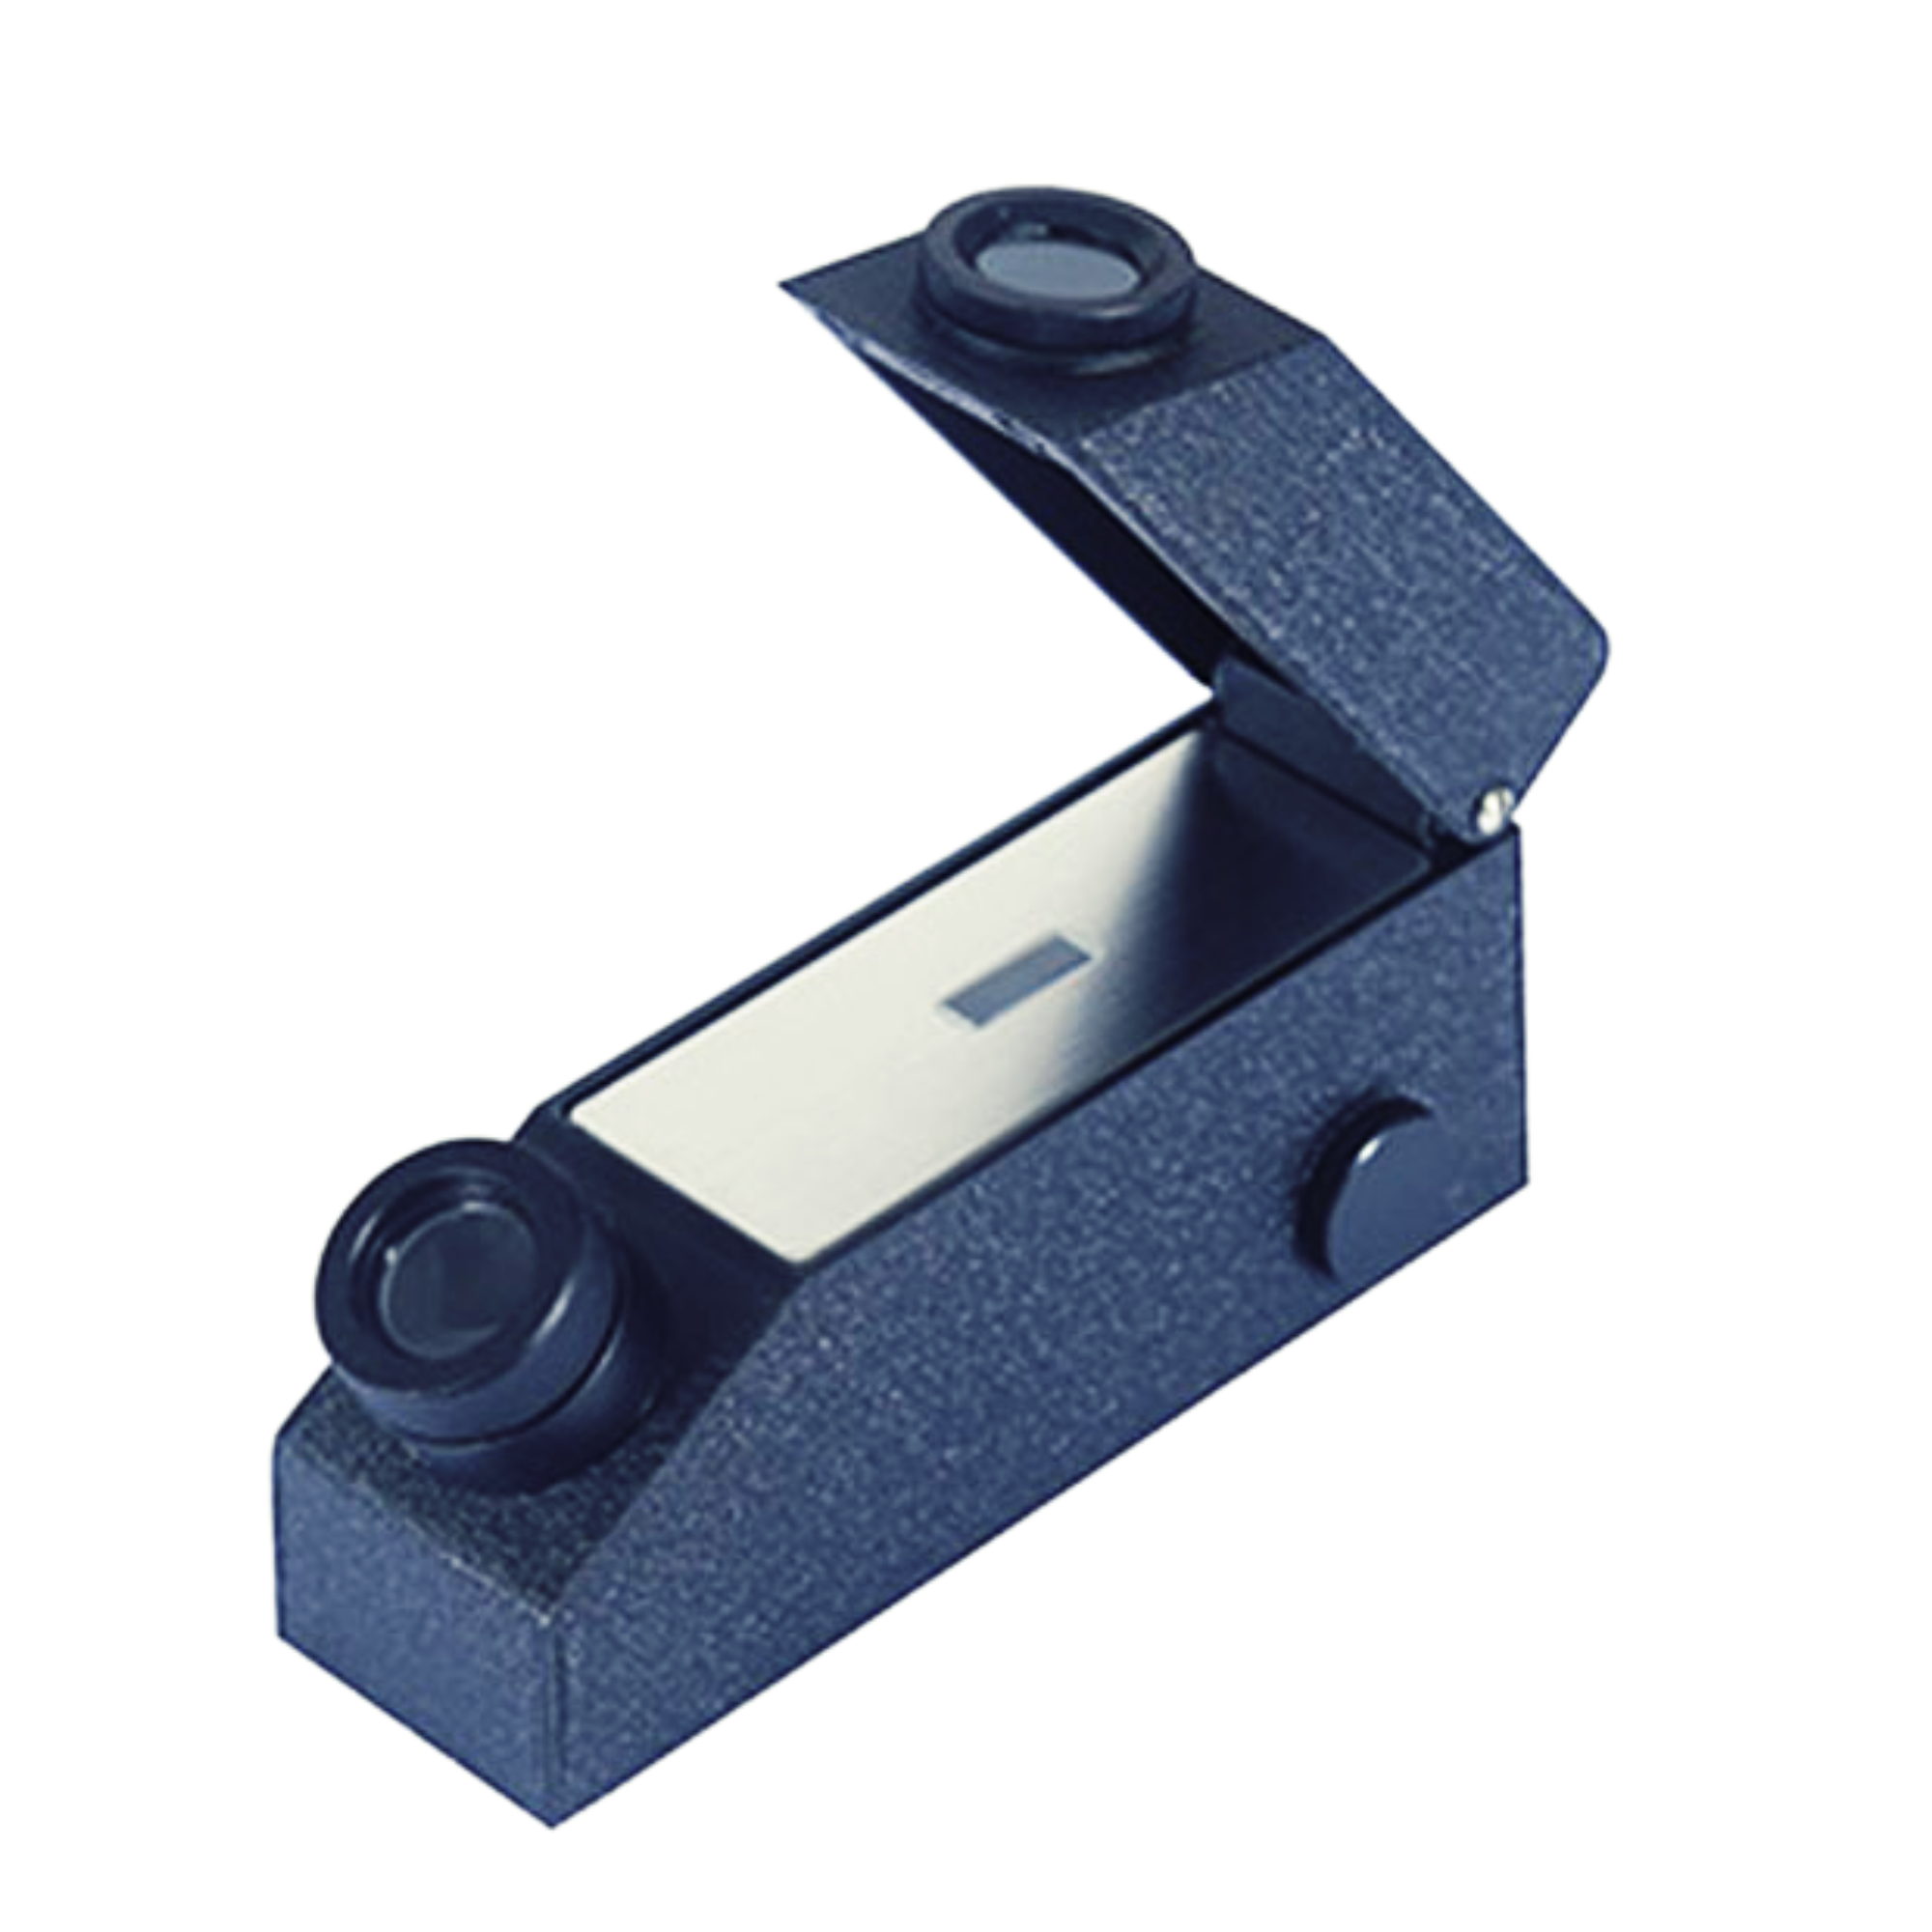 Gemological Refractometer with LED light source - battery operated